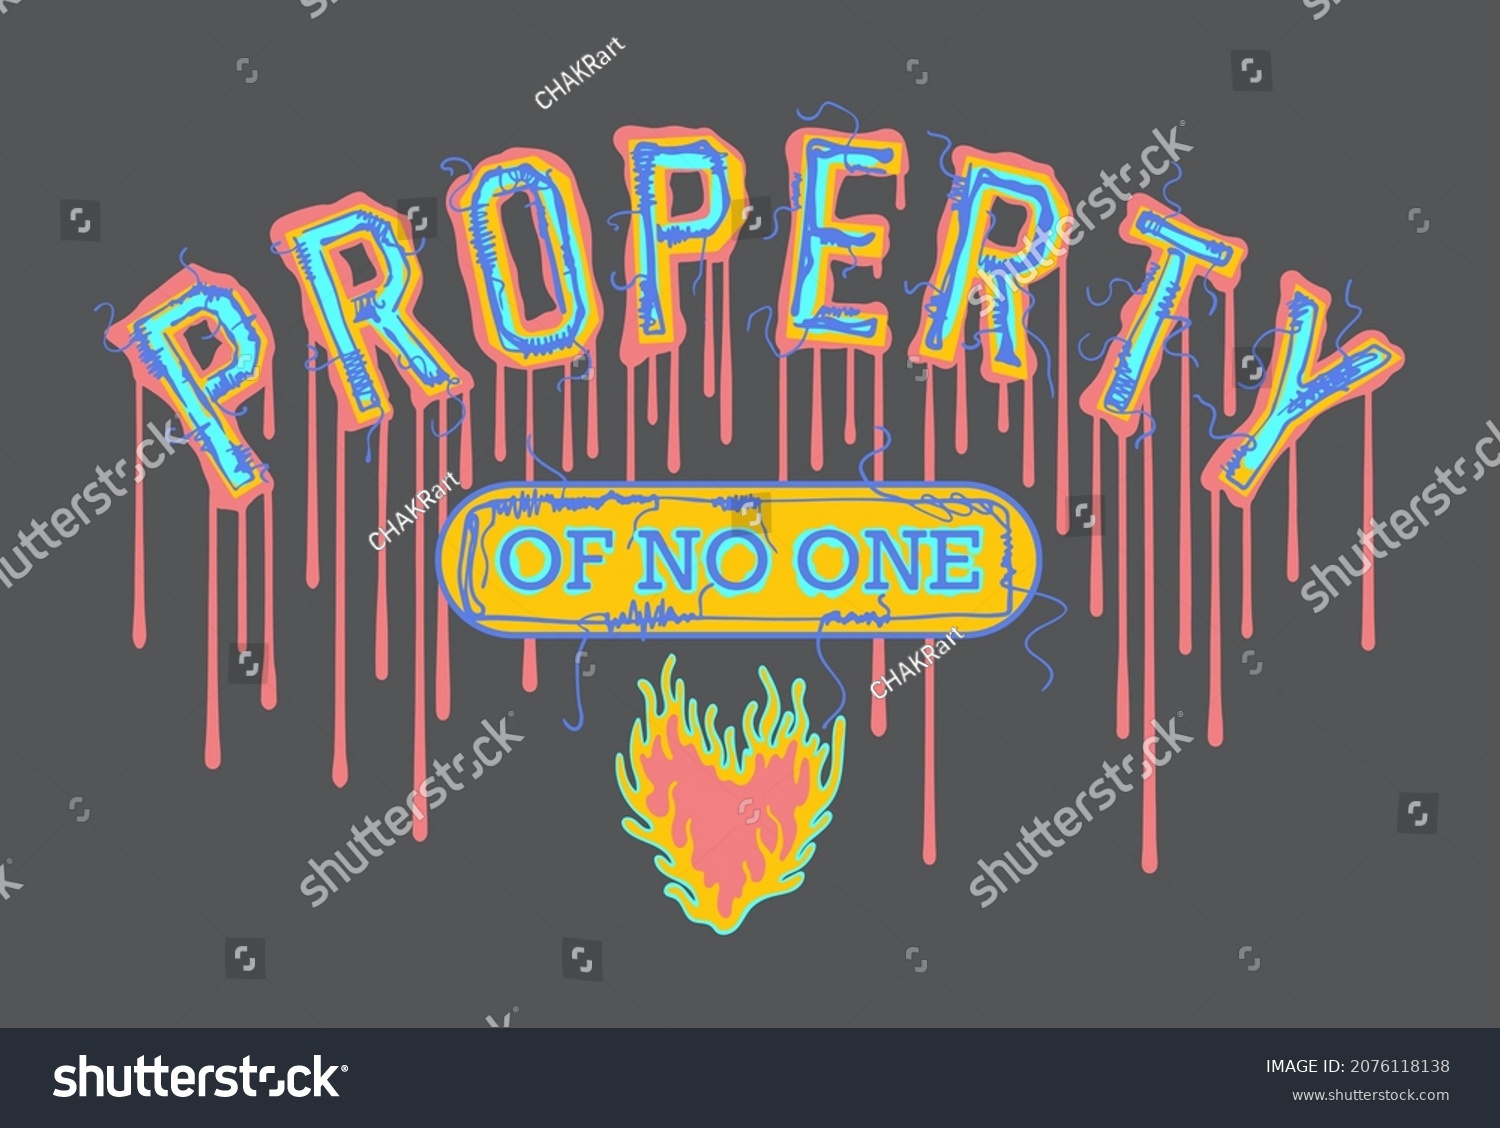 SVG of Property of no one slogan print design with dripping ink burning heart and embroidery details included in varsity print style svg